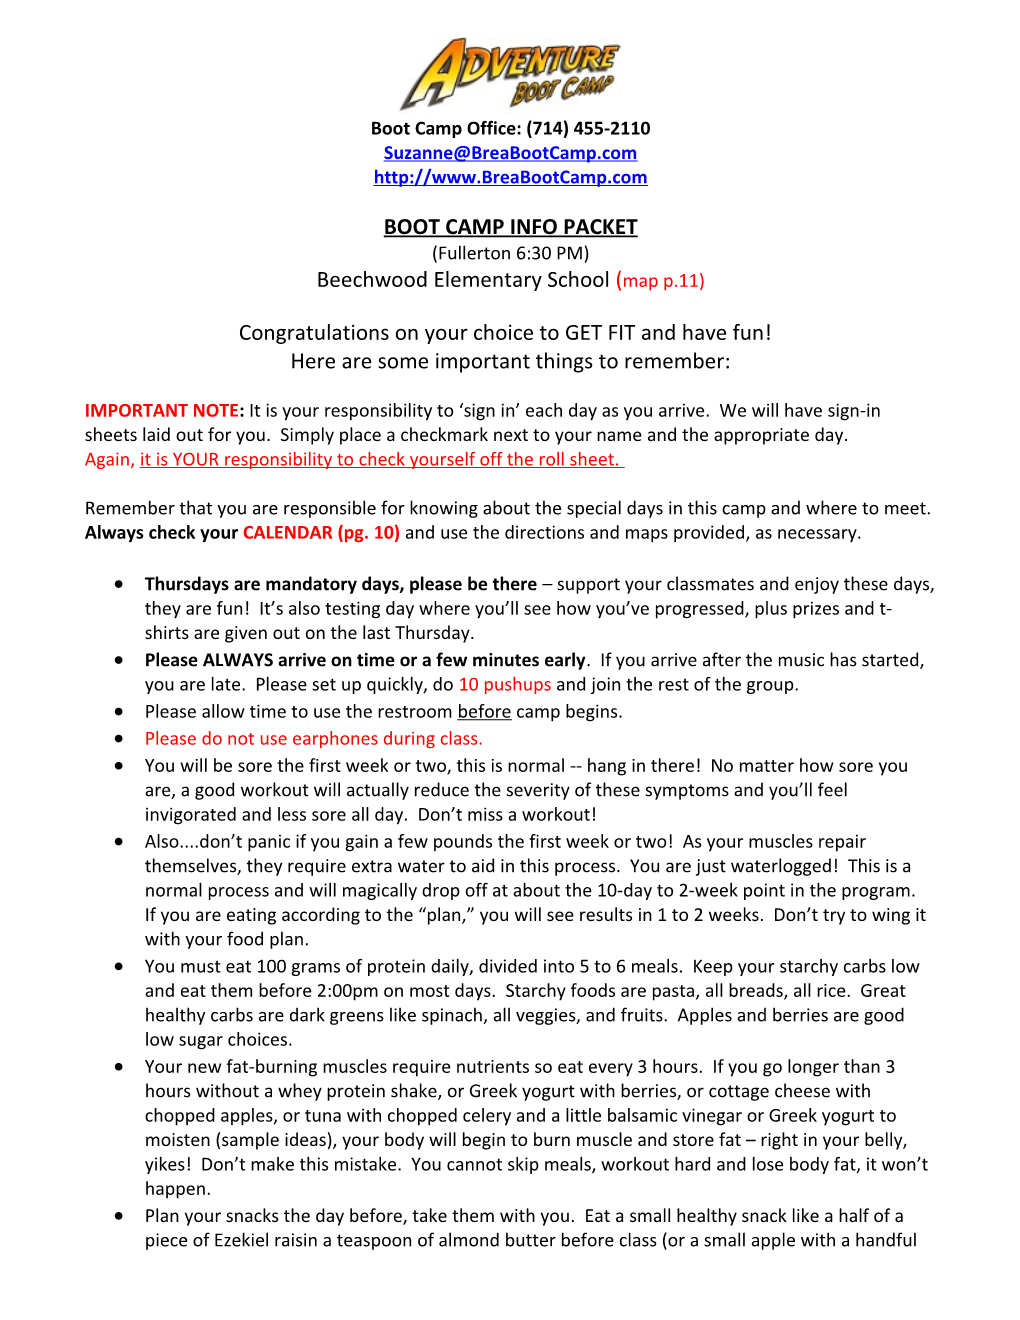 Boot Camp Info Packet